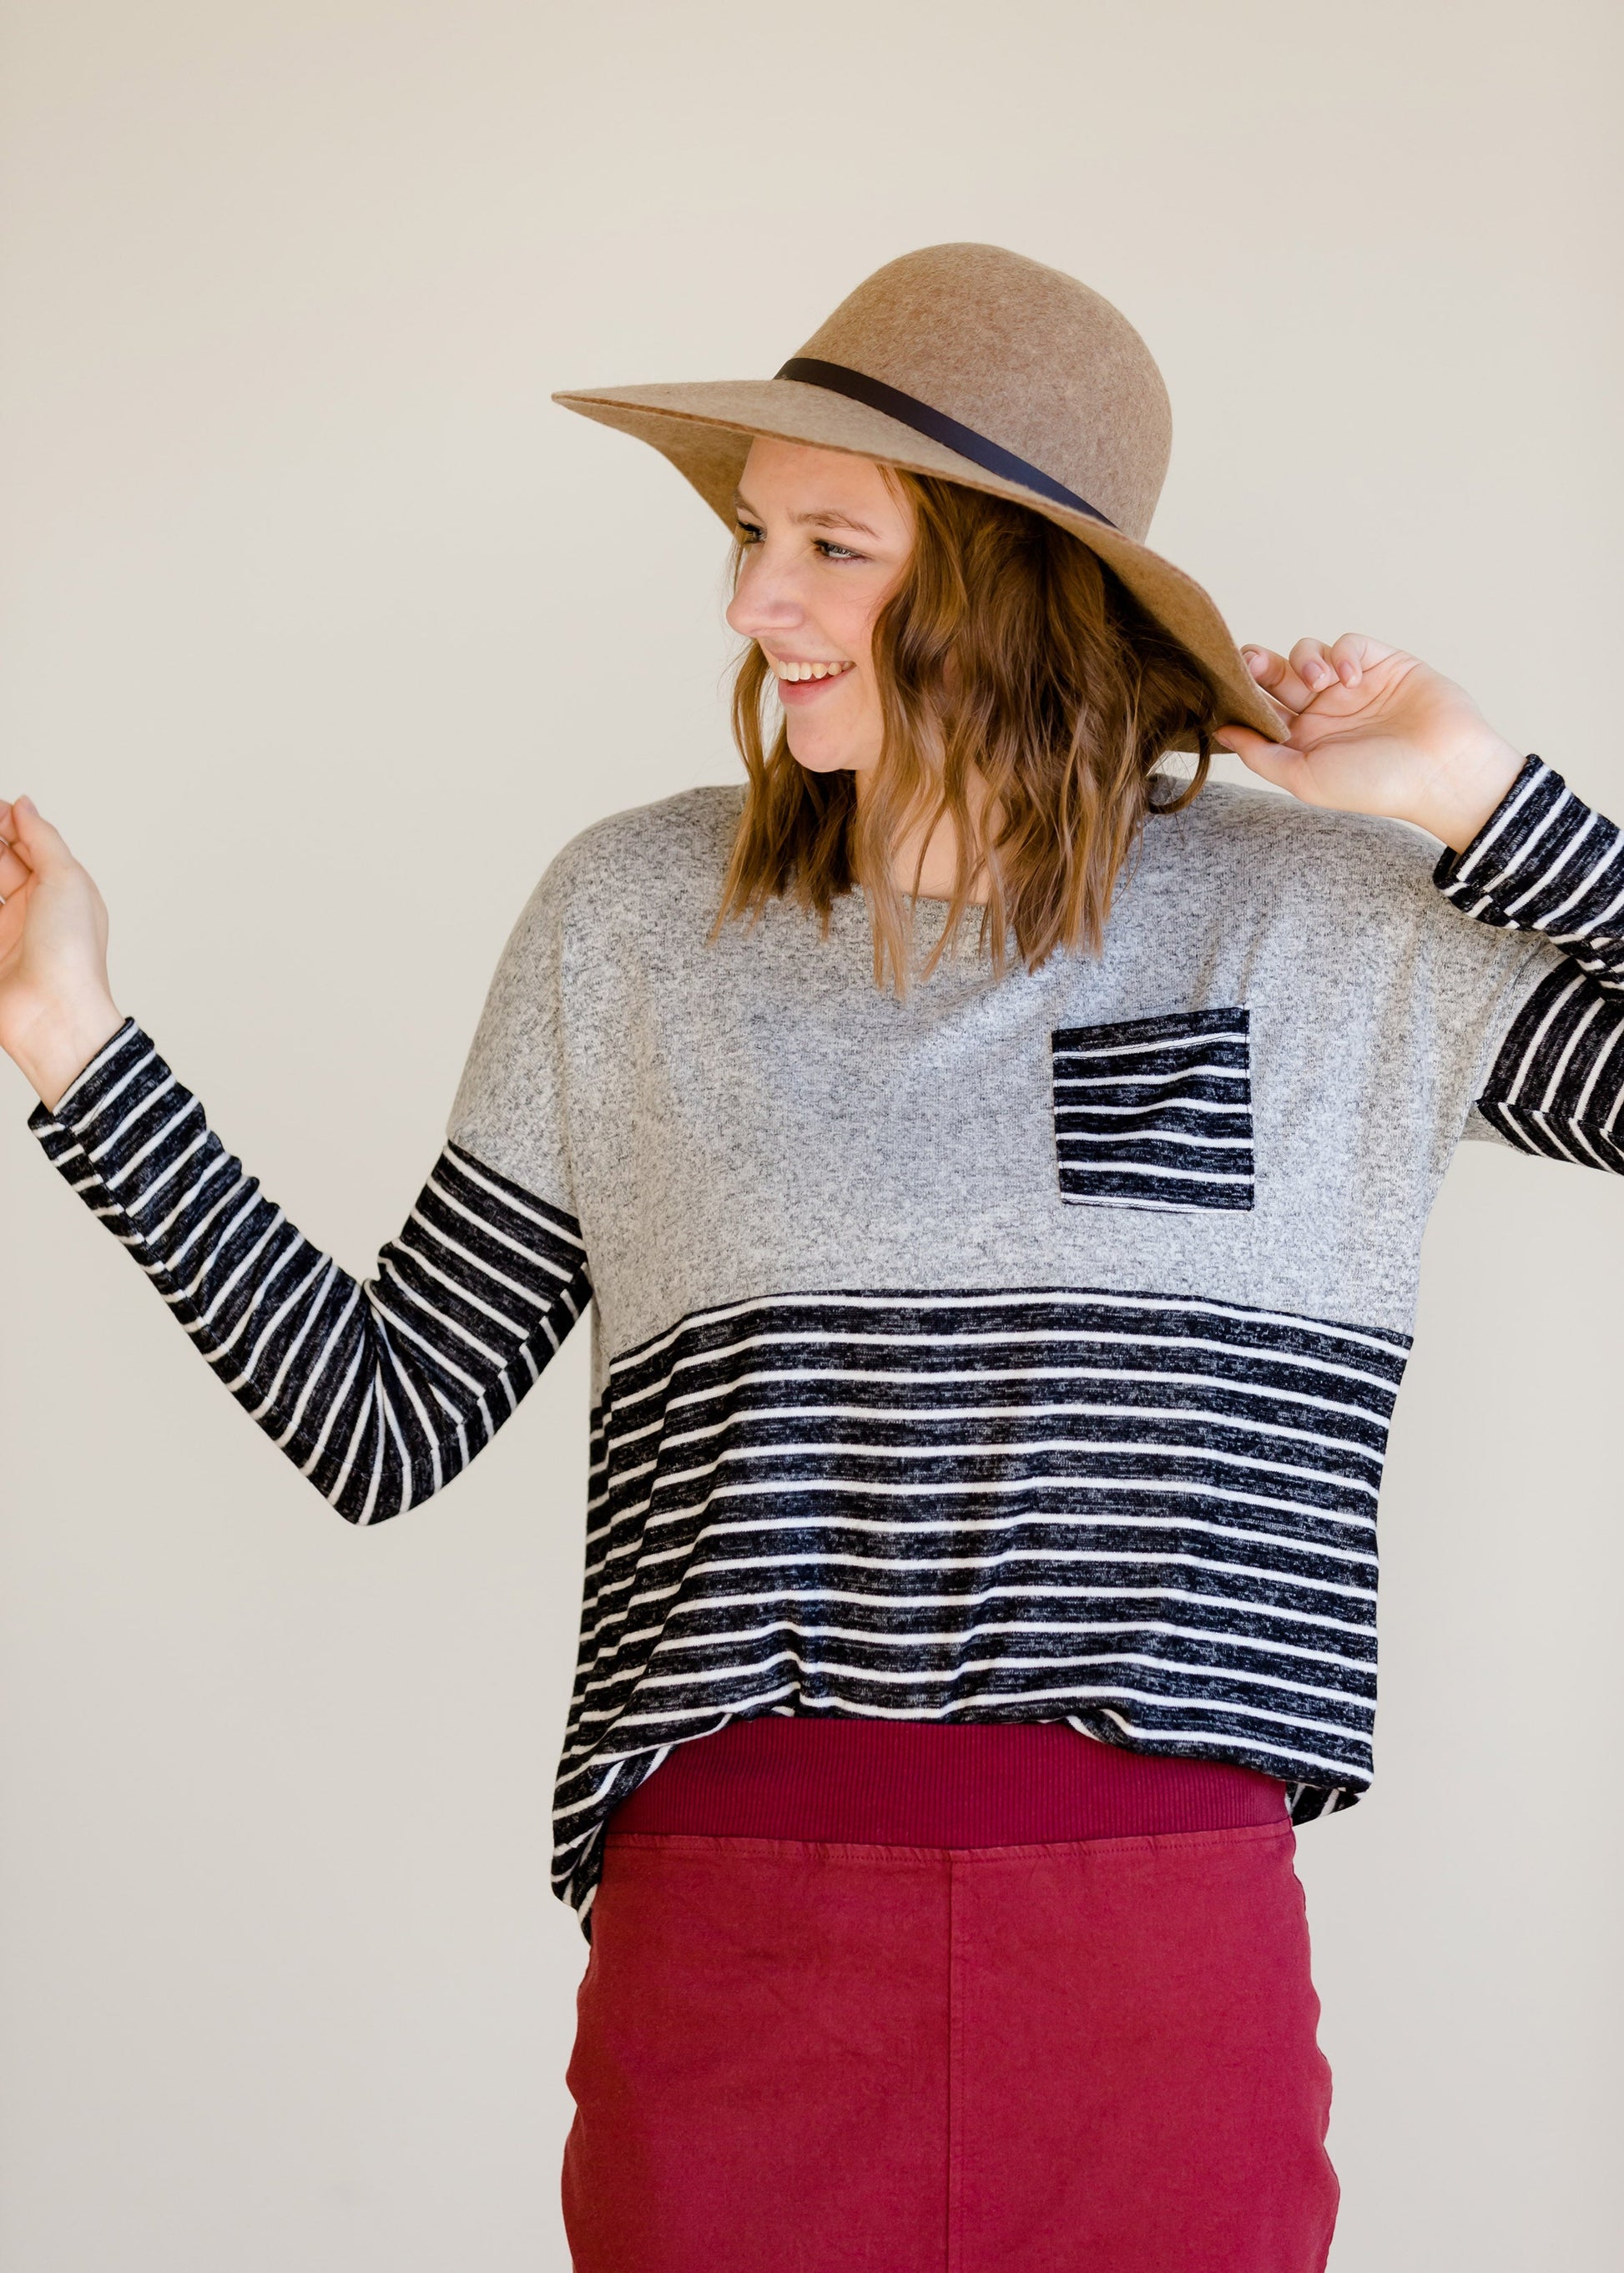 Colorblock Long Sleeve Striped Top - FINAL SALE Tops